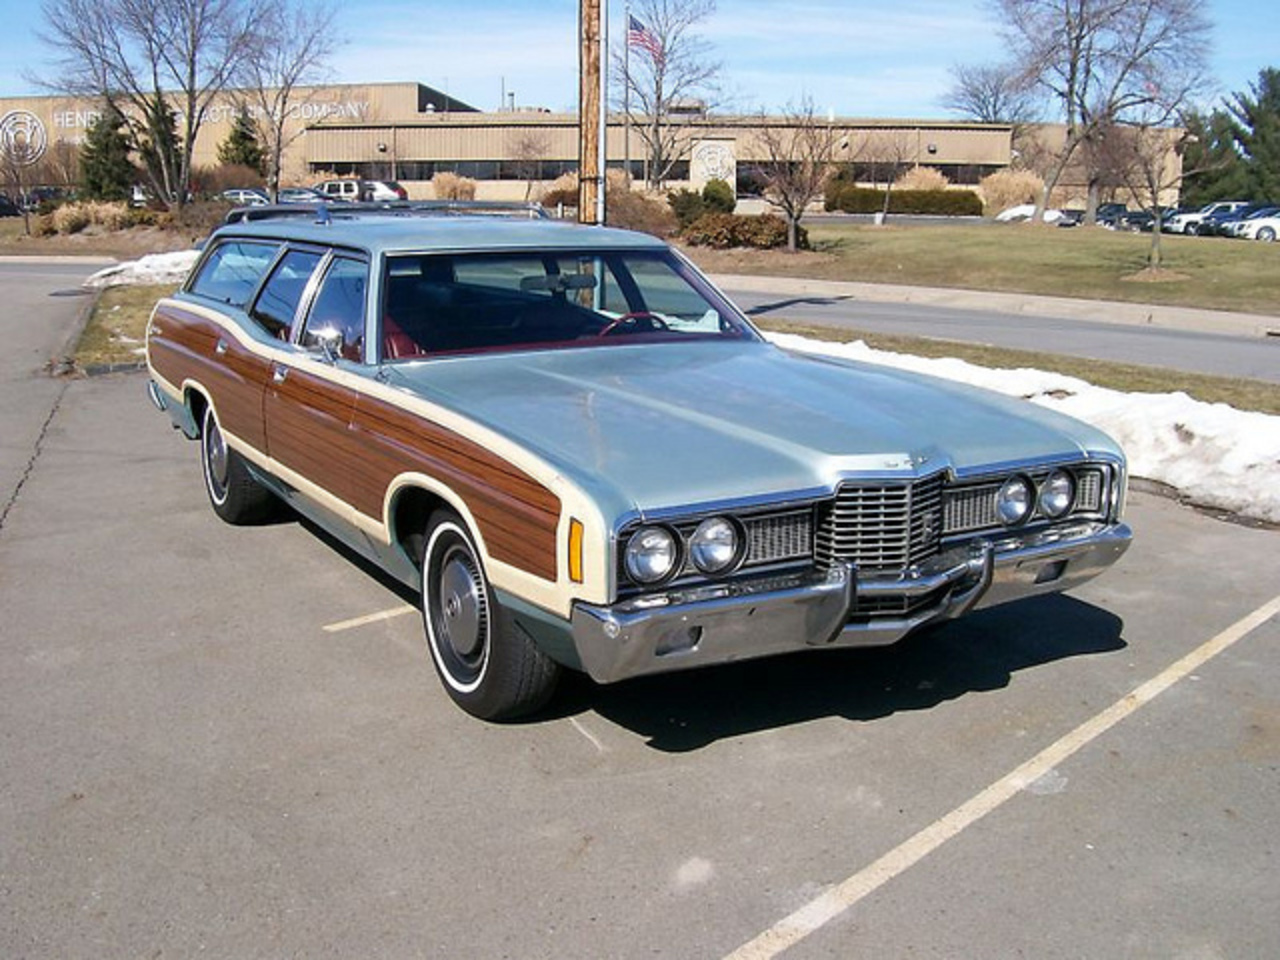 8361_1972-ford-ltd-country-squire-wagon-flickr-photo-sharing.jpg